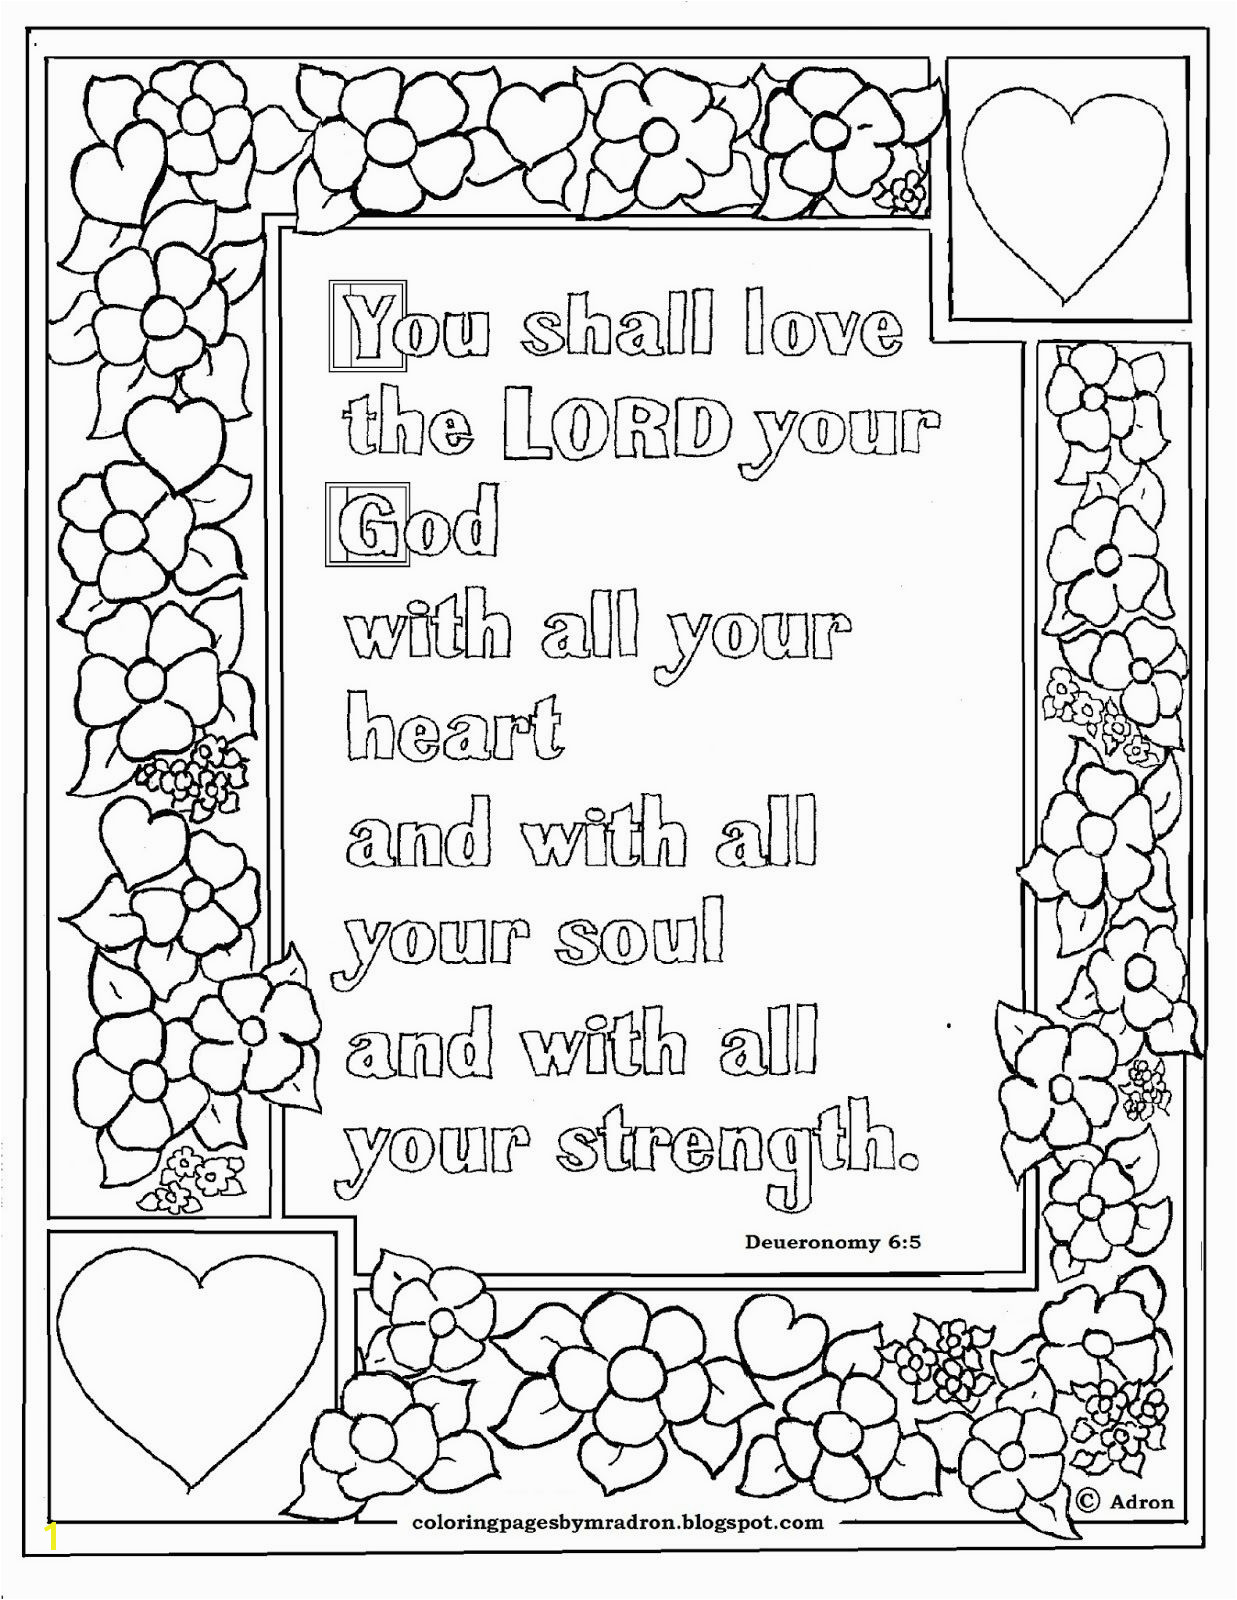 Deuteronomy 6 5 Bible verse to print and color This is a free printable Bible verse coloring page it is perfect for children and adults t